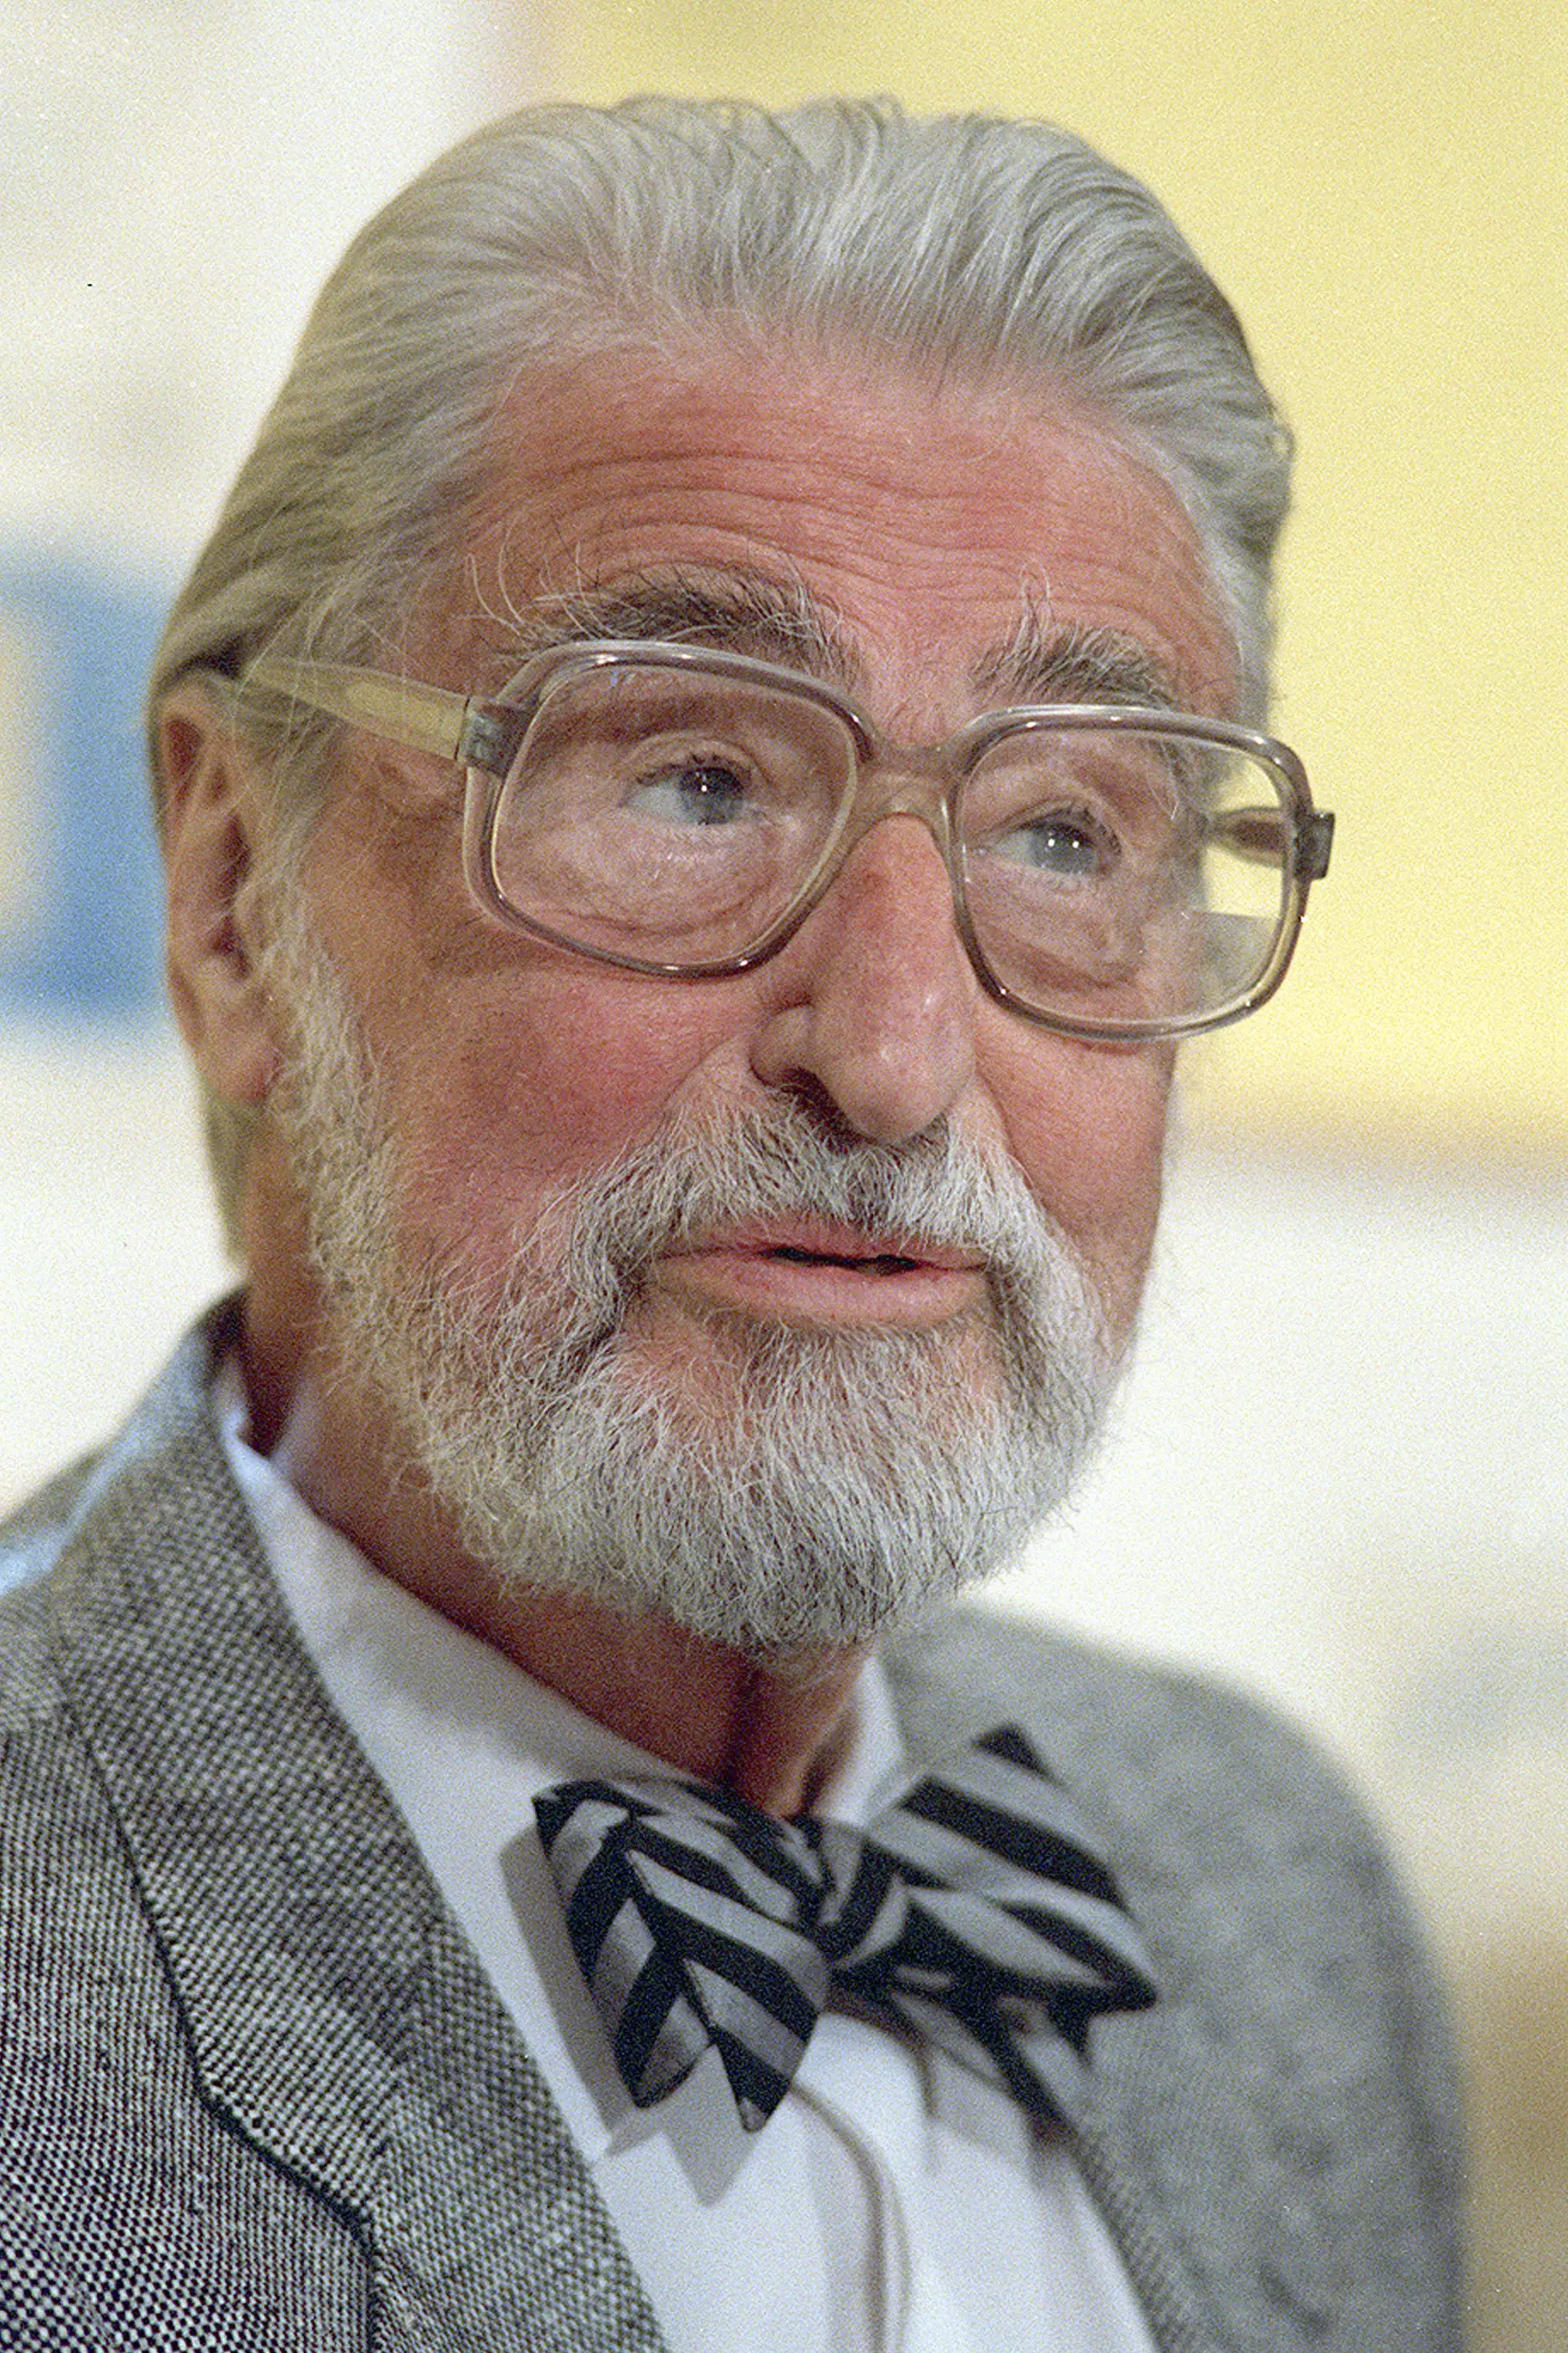 Dr. Seuss - pictured here in 1987 - passed away in 1991 (